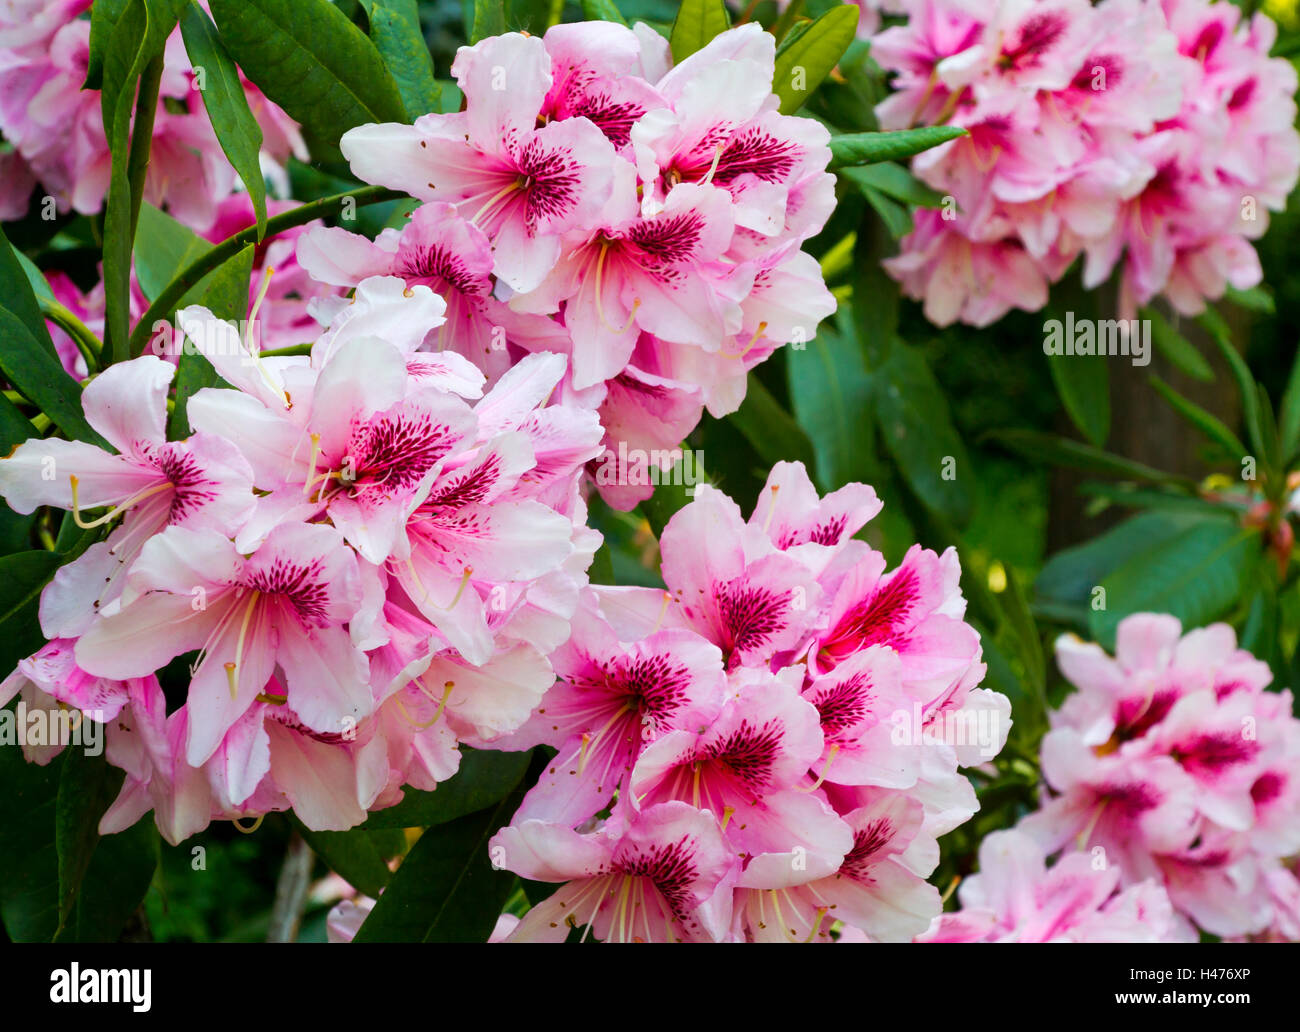 Pink rhododendron flowers growing in a garden in early summer a genus of many species of woody plants in the family Ericaceae. Stock Photo